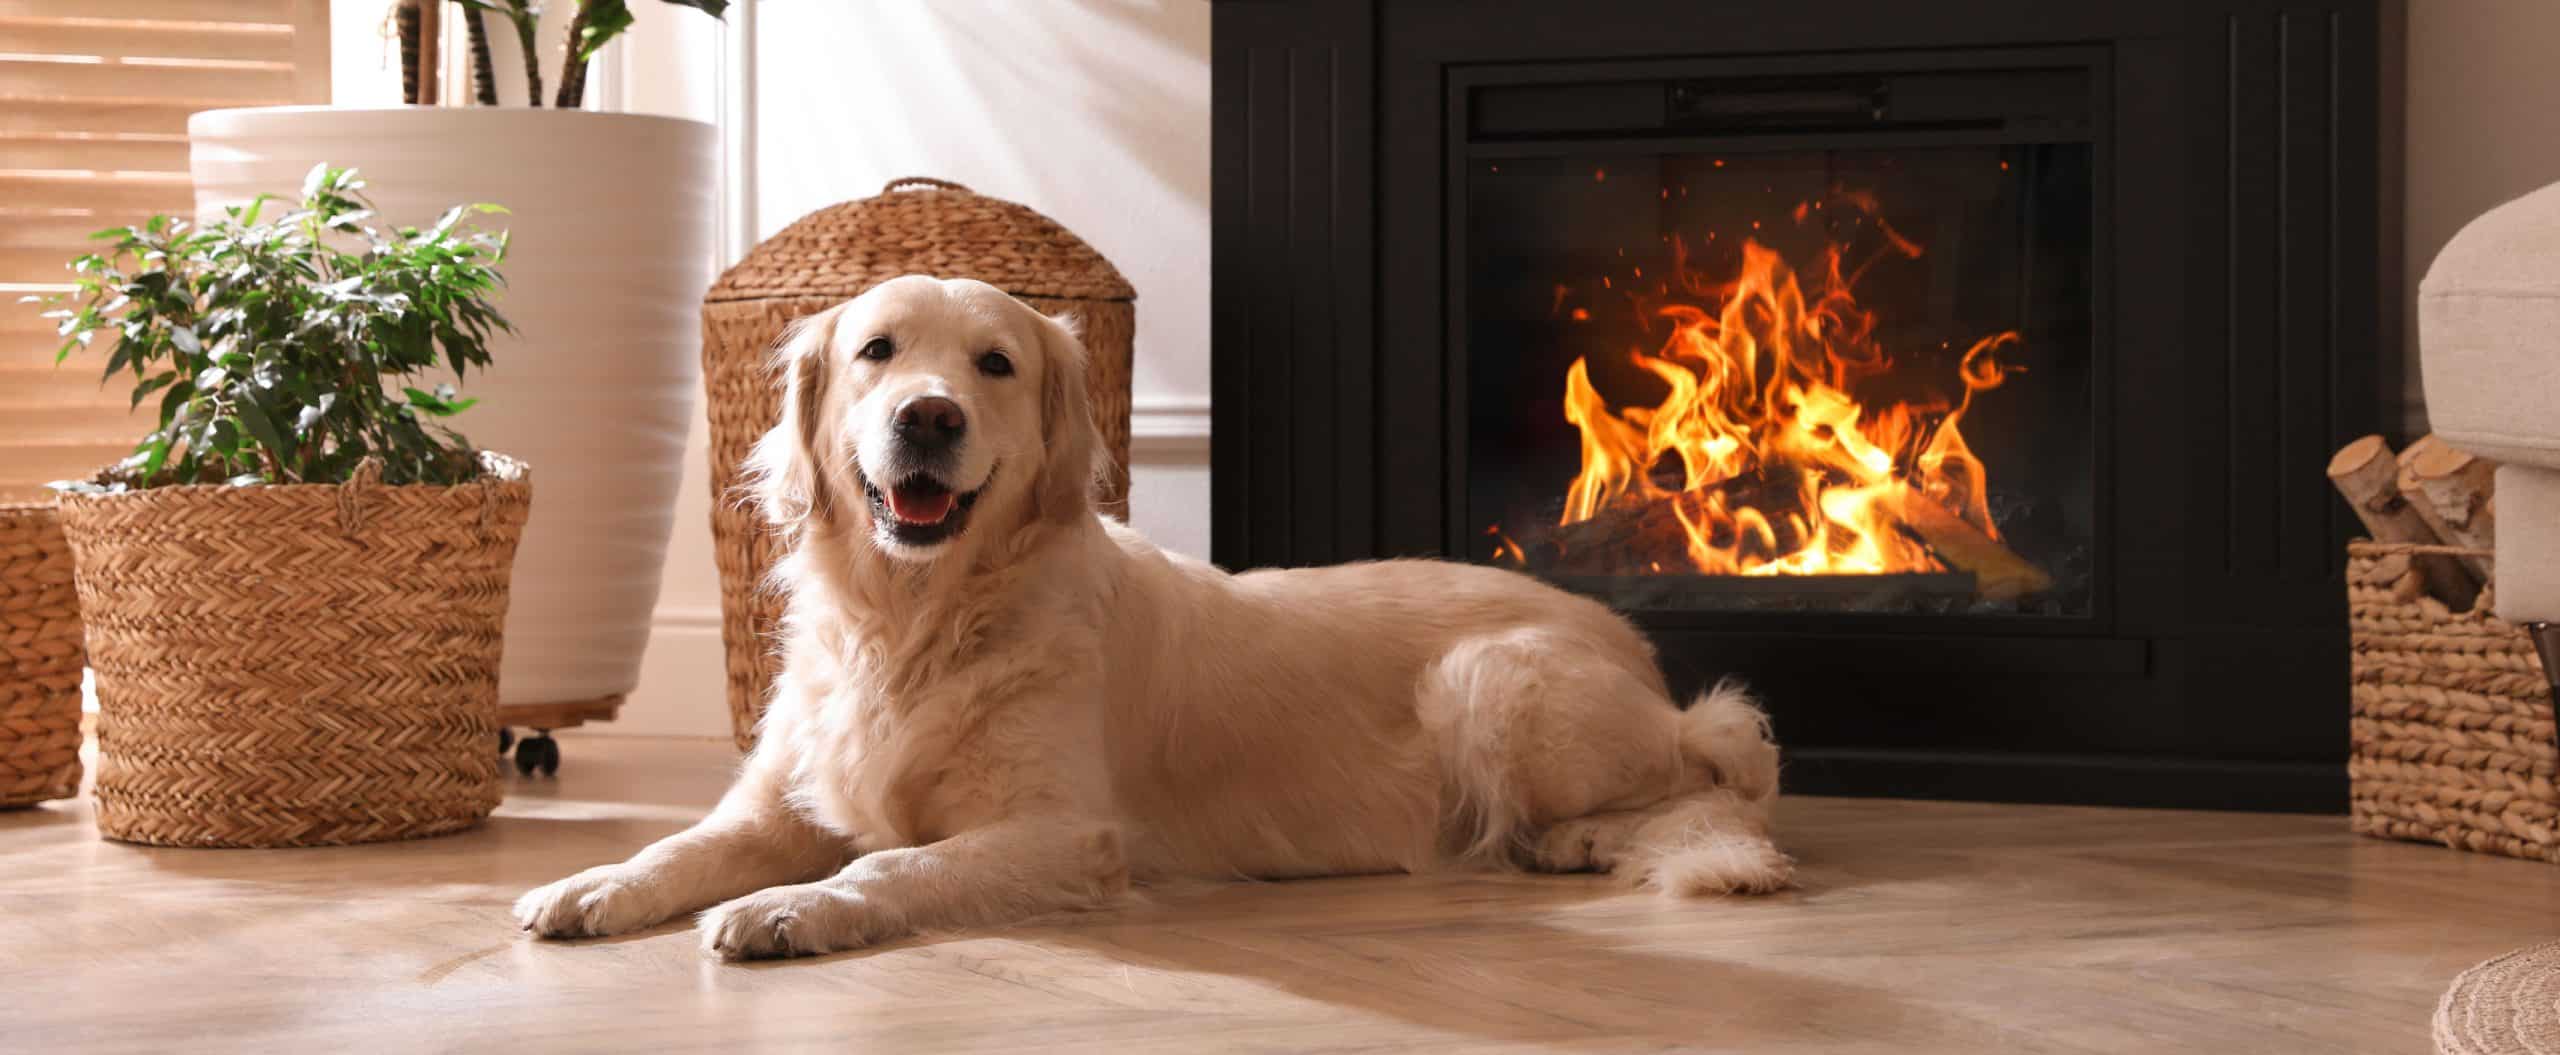 dog in front of new fireplace